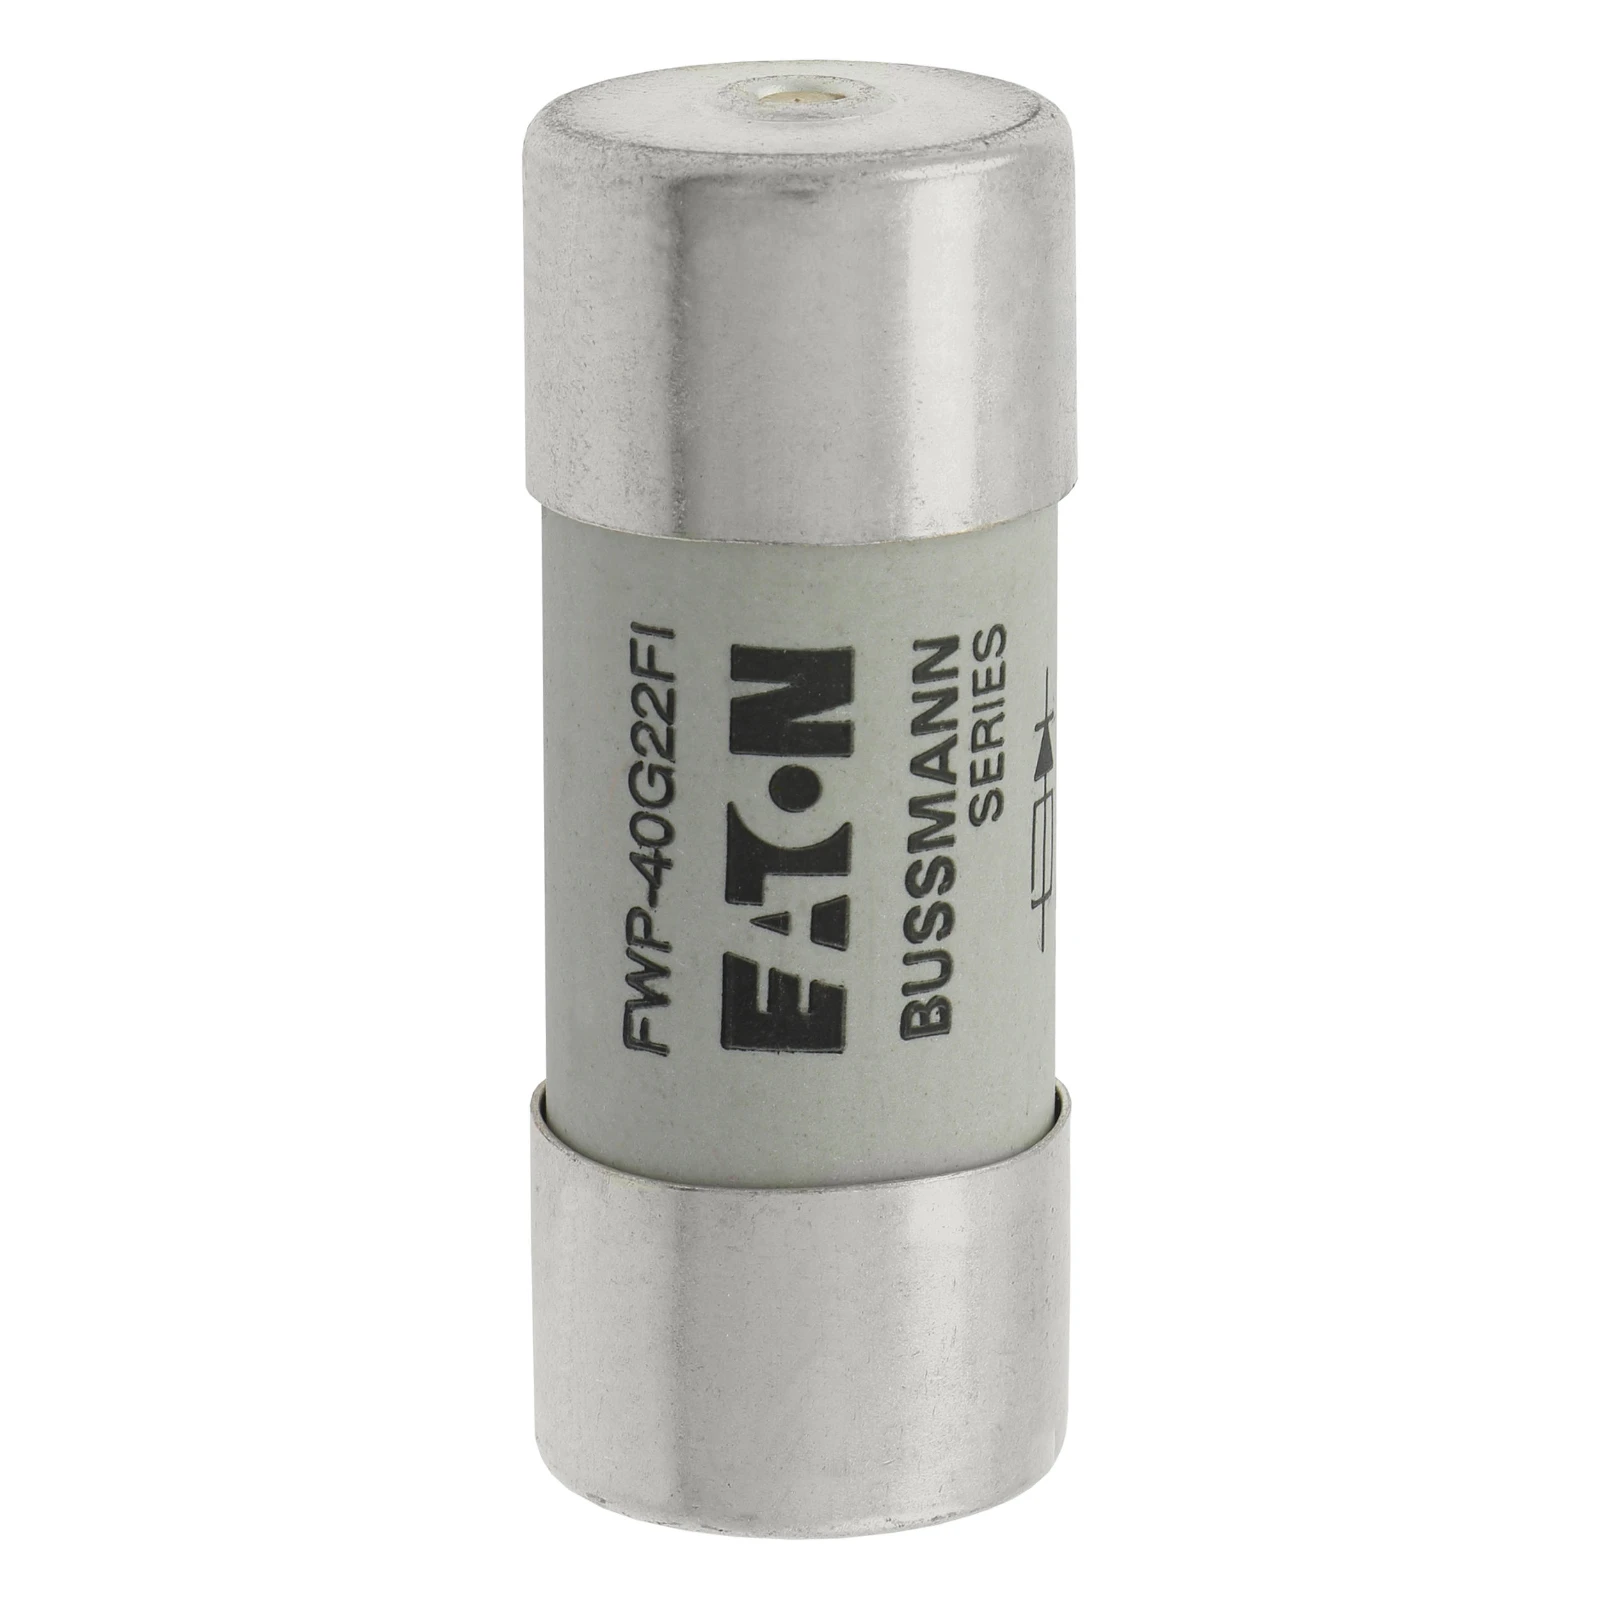 2545548 - Eaton Fuse 40A 690VAC gR 22x58 with Ind